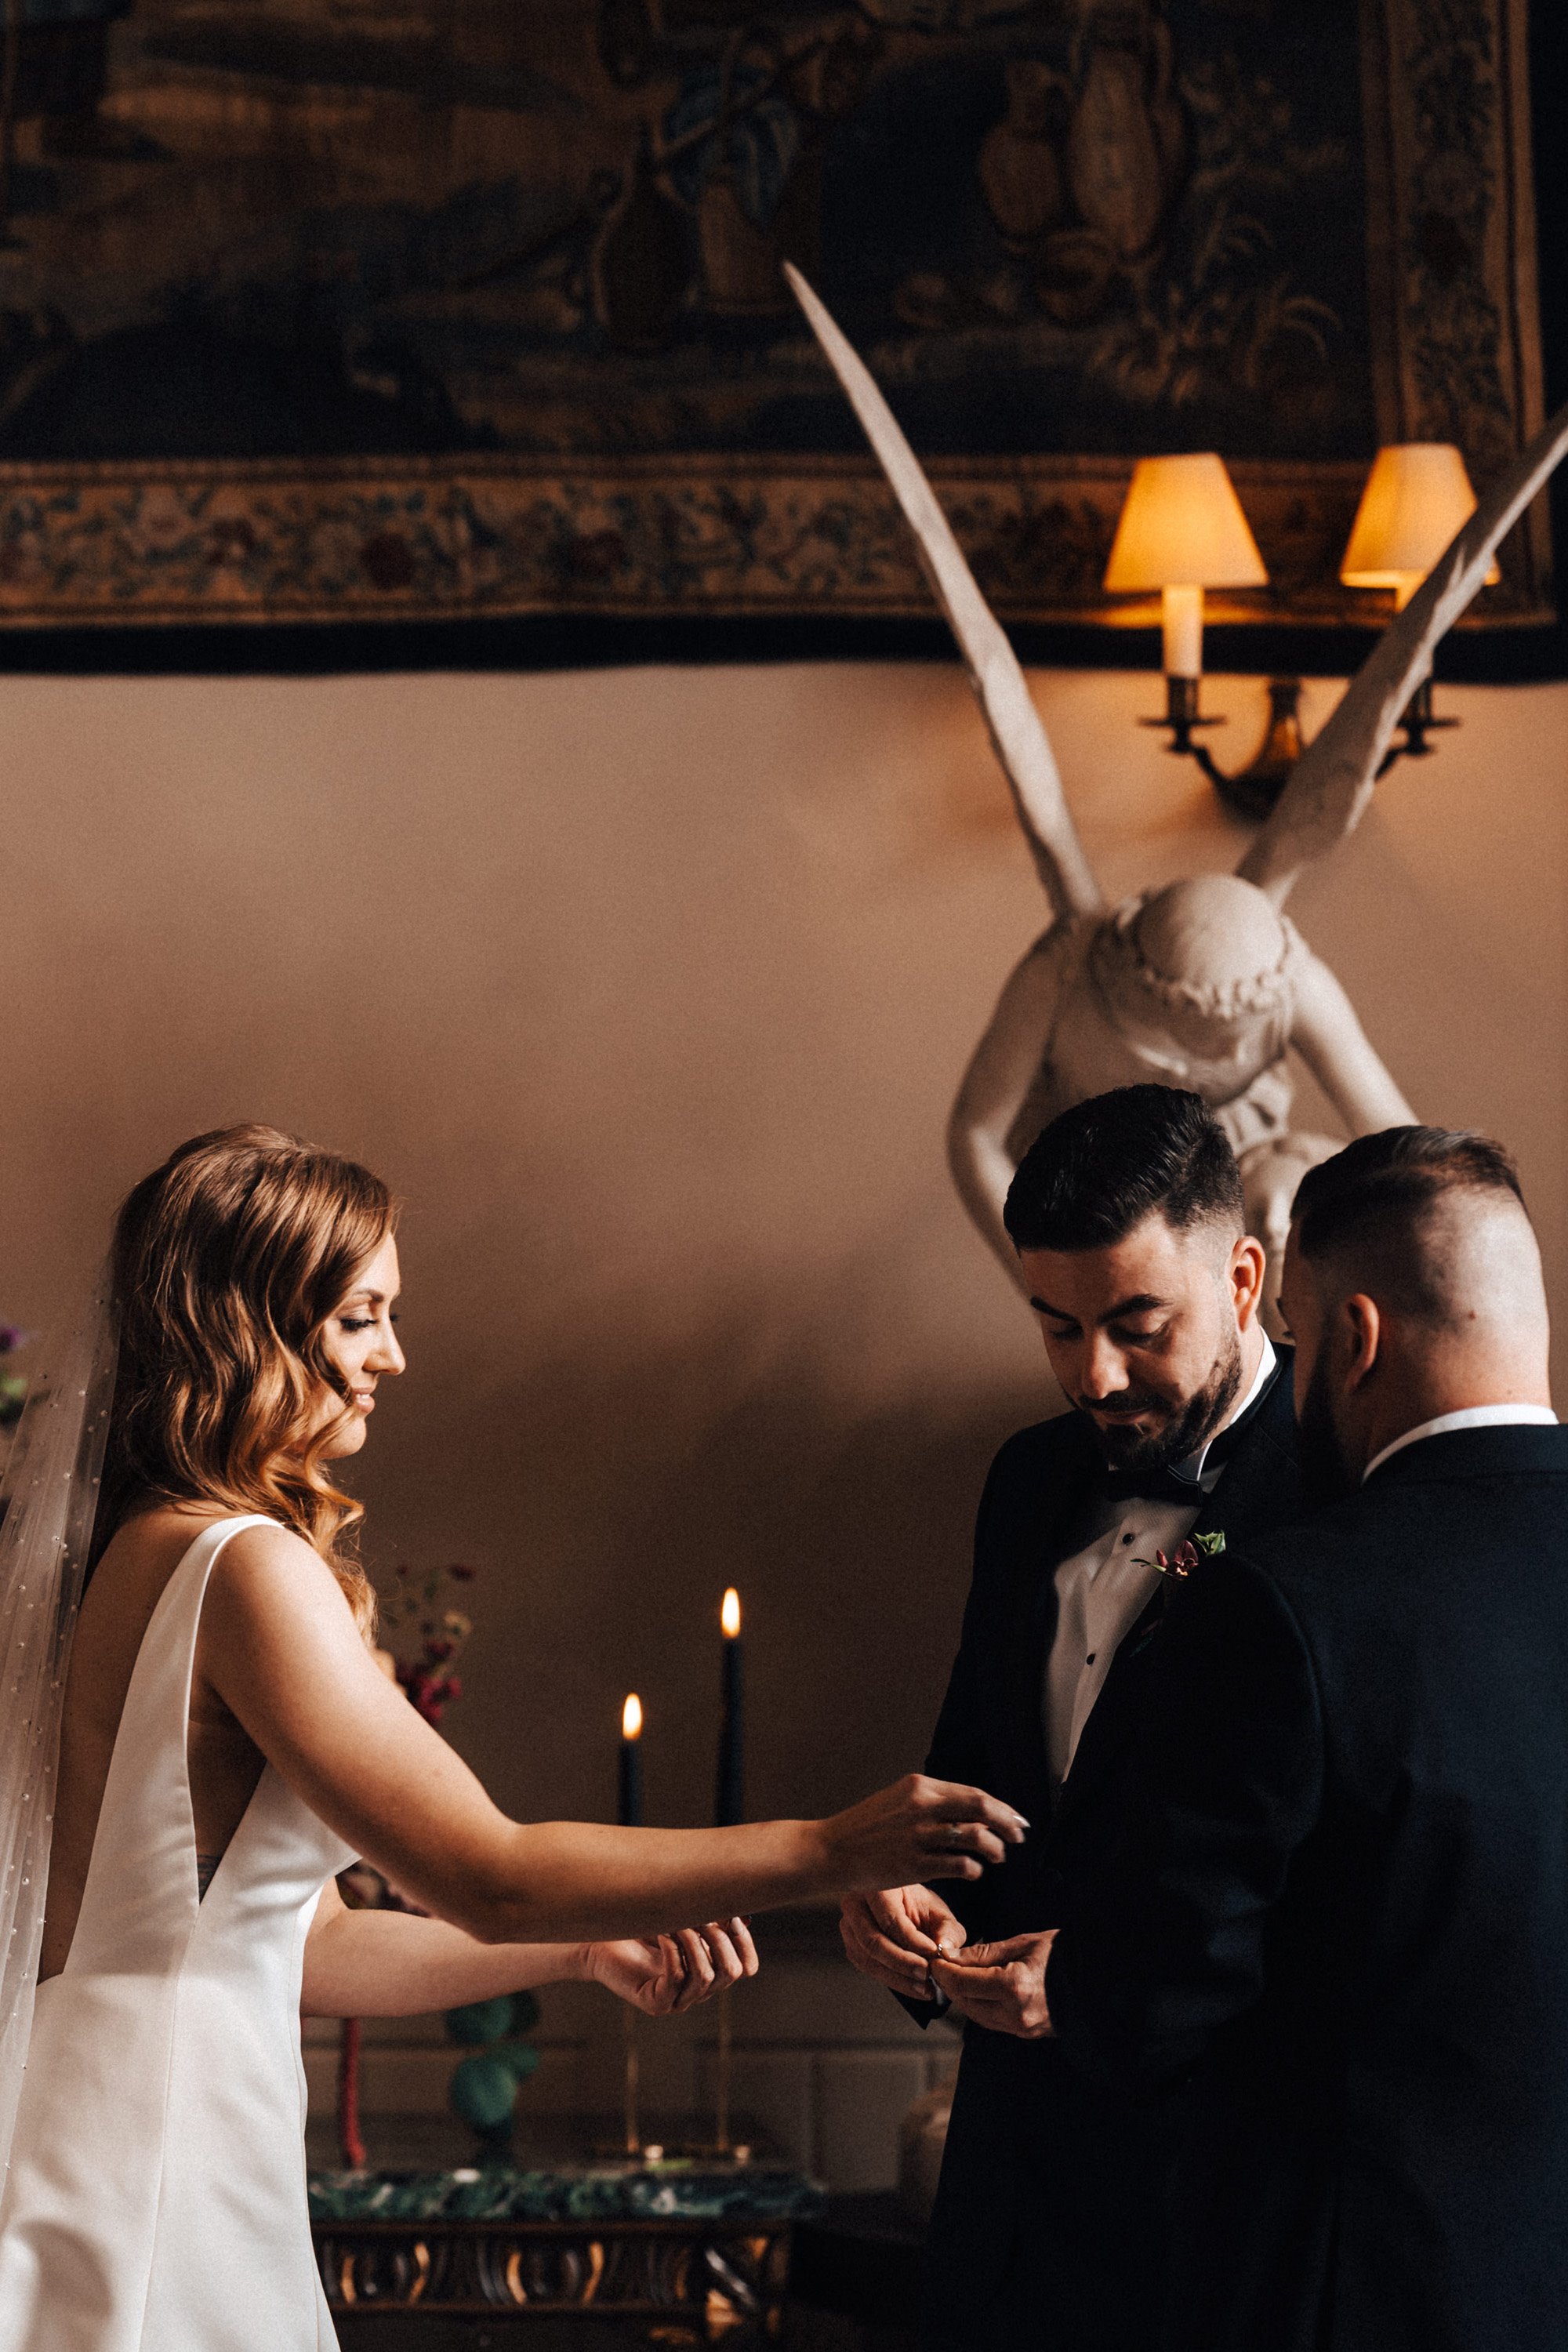 bride and groom exchange rings at Moody october wedding ceremony with black candles and angel statues in historic country house in gloucestershire